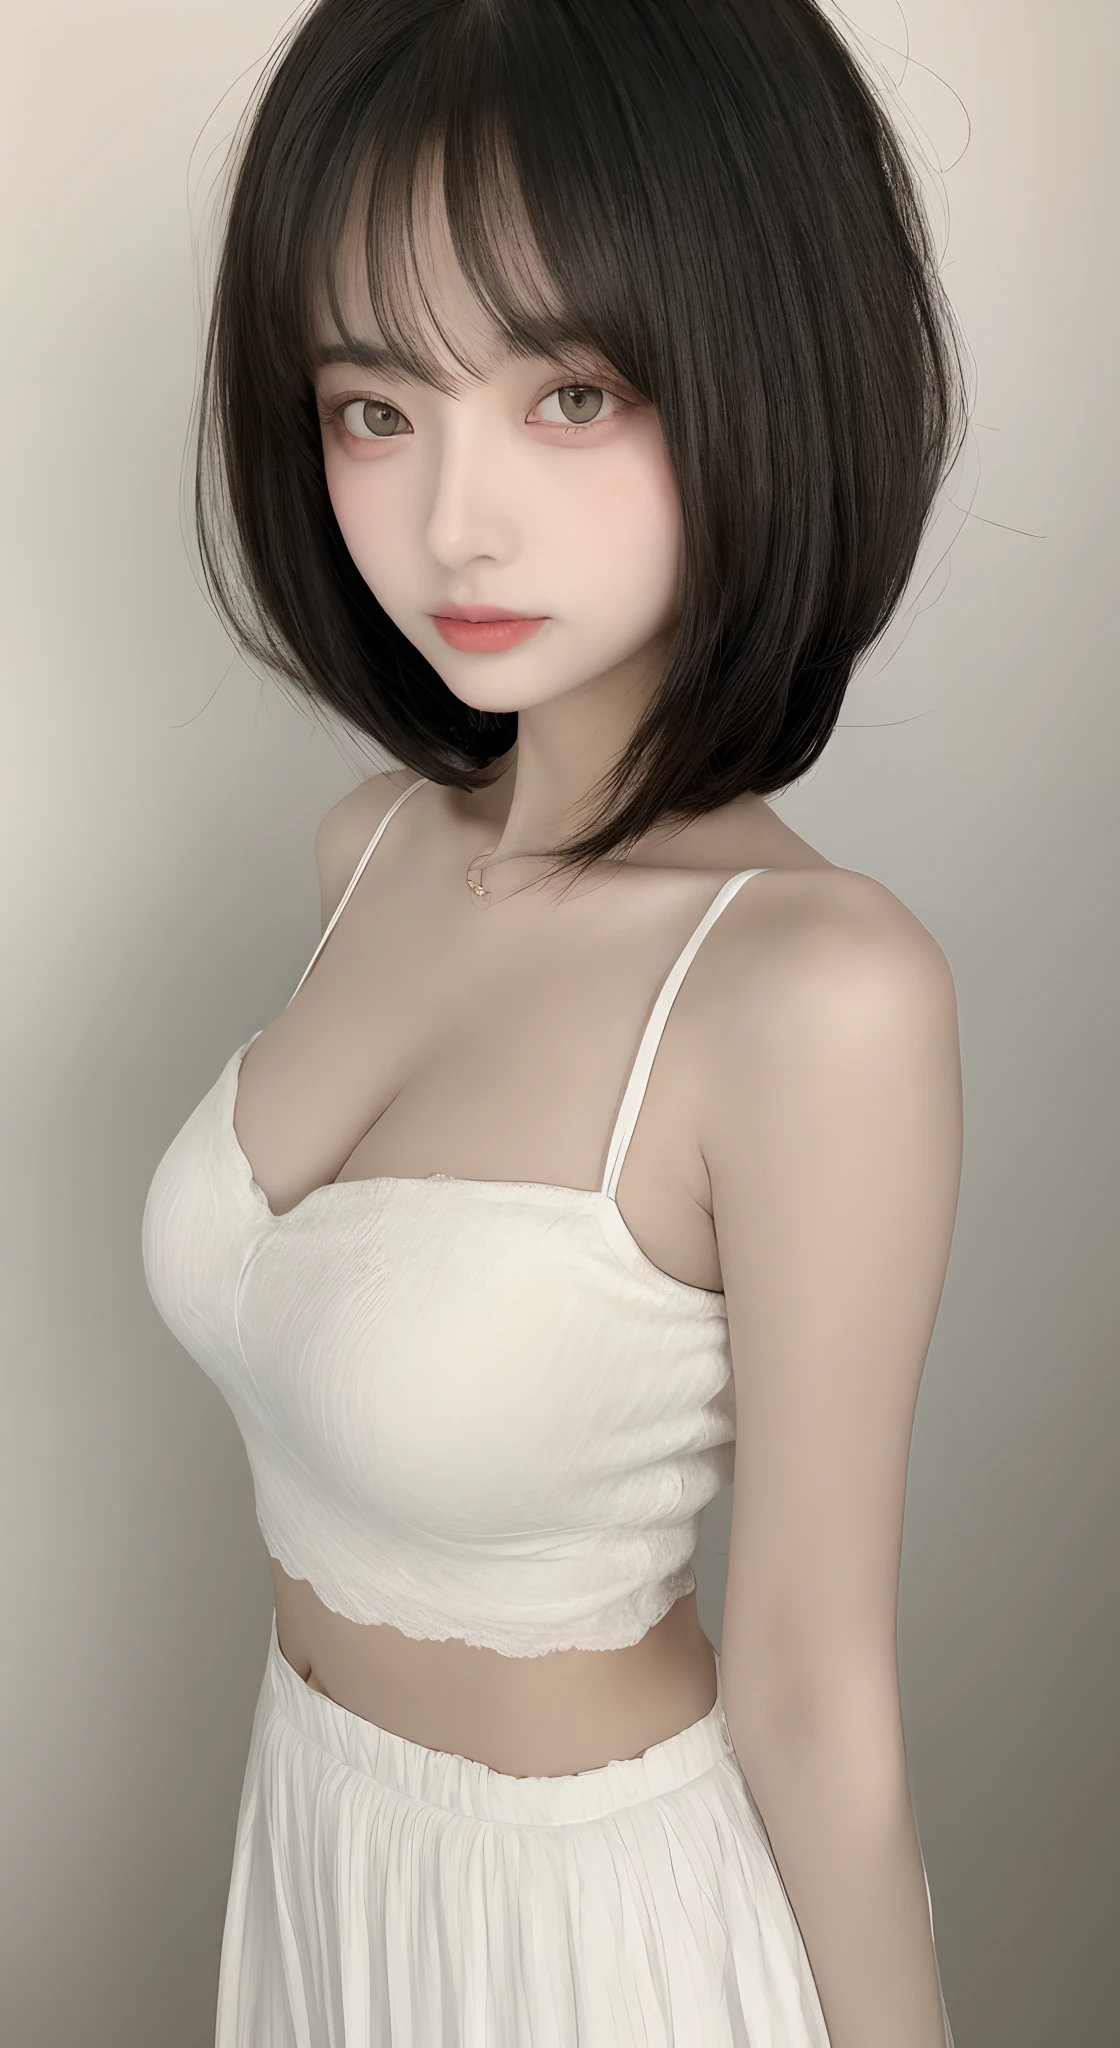 perfect figure beautiful woman：1.4，Layered Hair Style，Protruding cleavage：1.2，headband：1.5，Highly Detailed Face and Skin Textur，Narrow eyes，double eyelid，Whitens the skin，short detailed hair，full bodyesbian